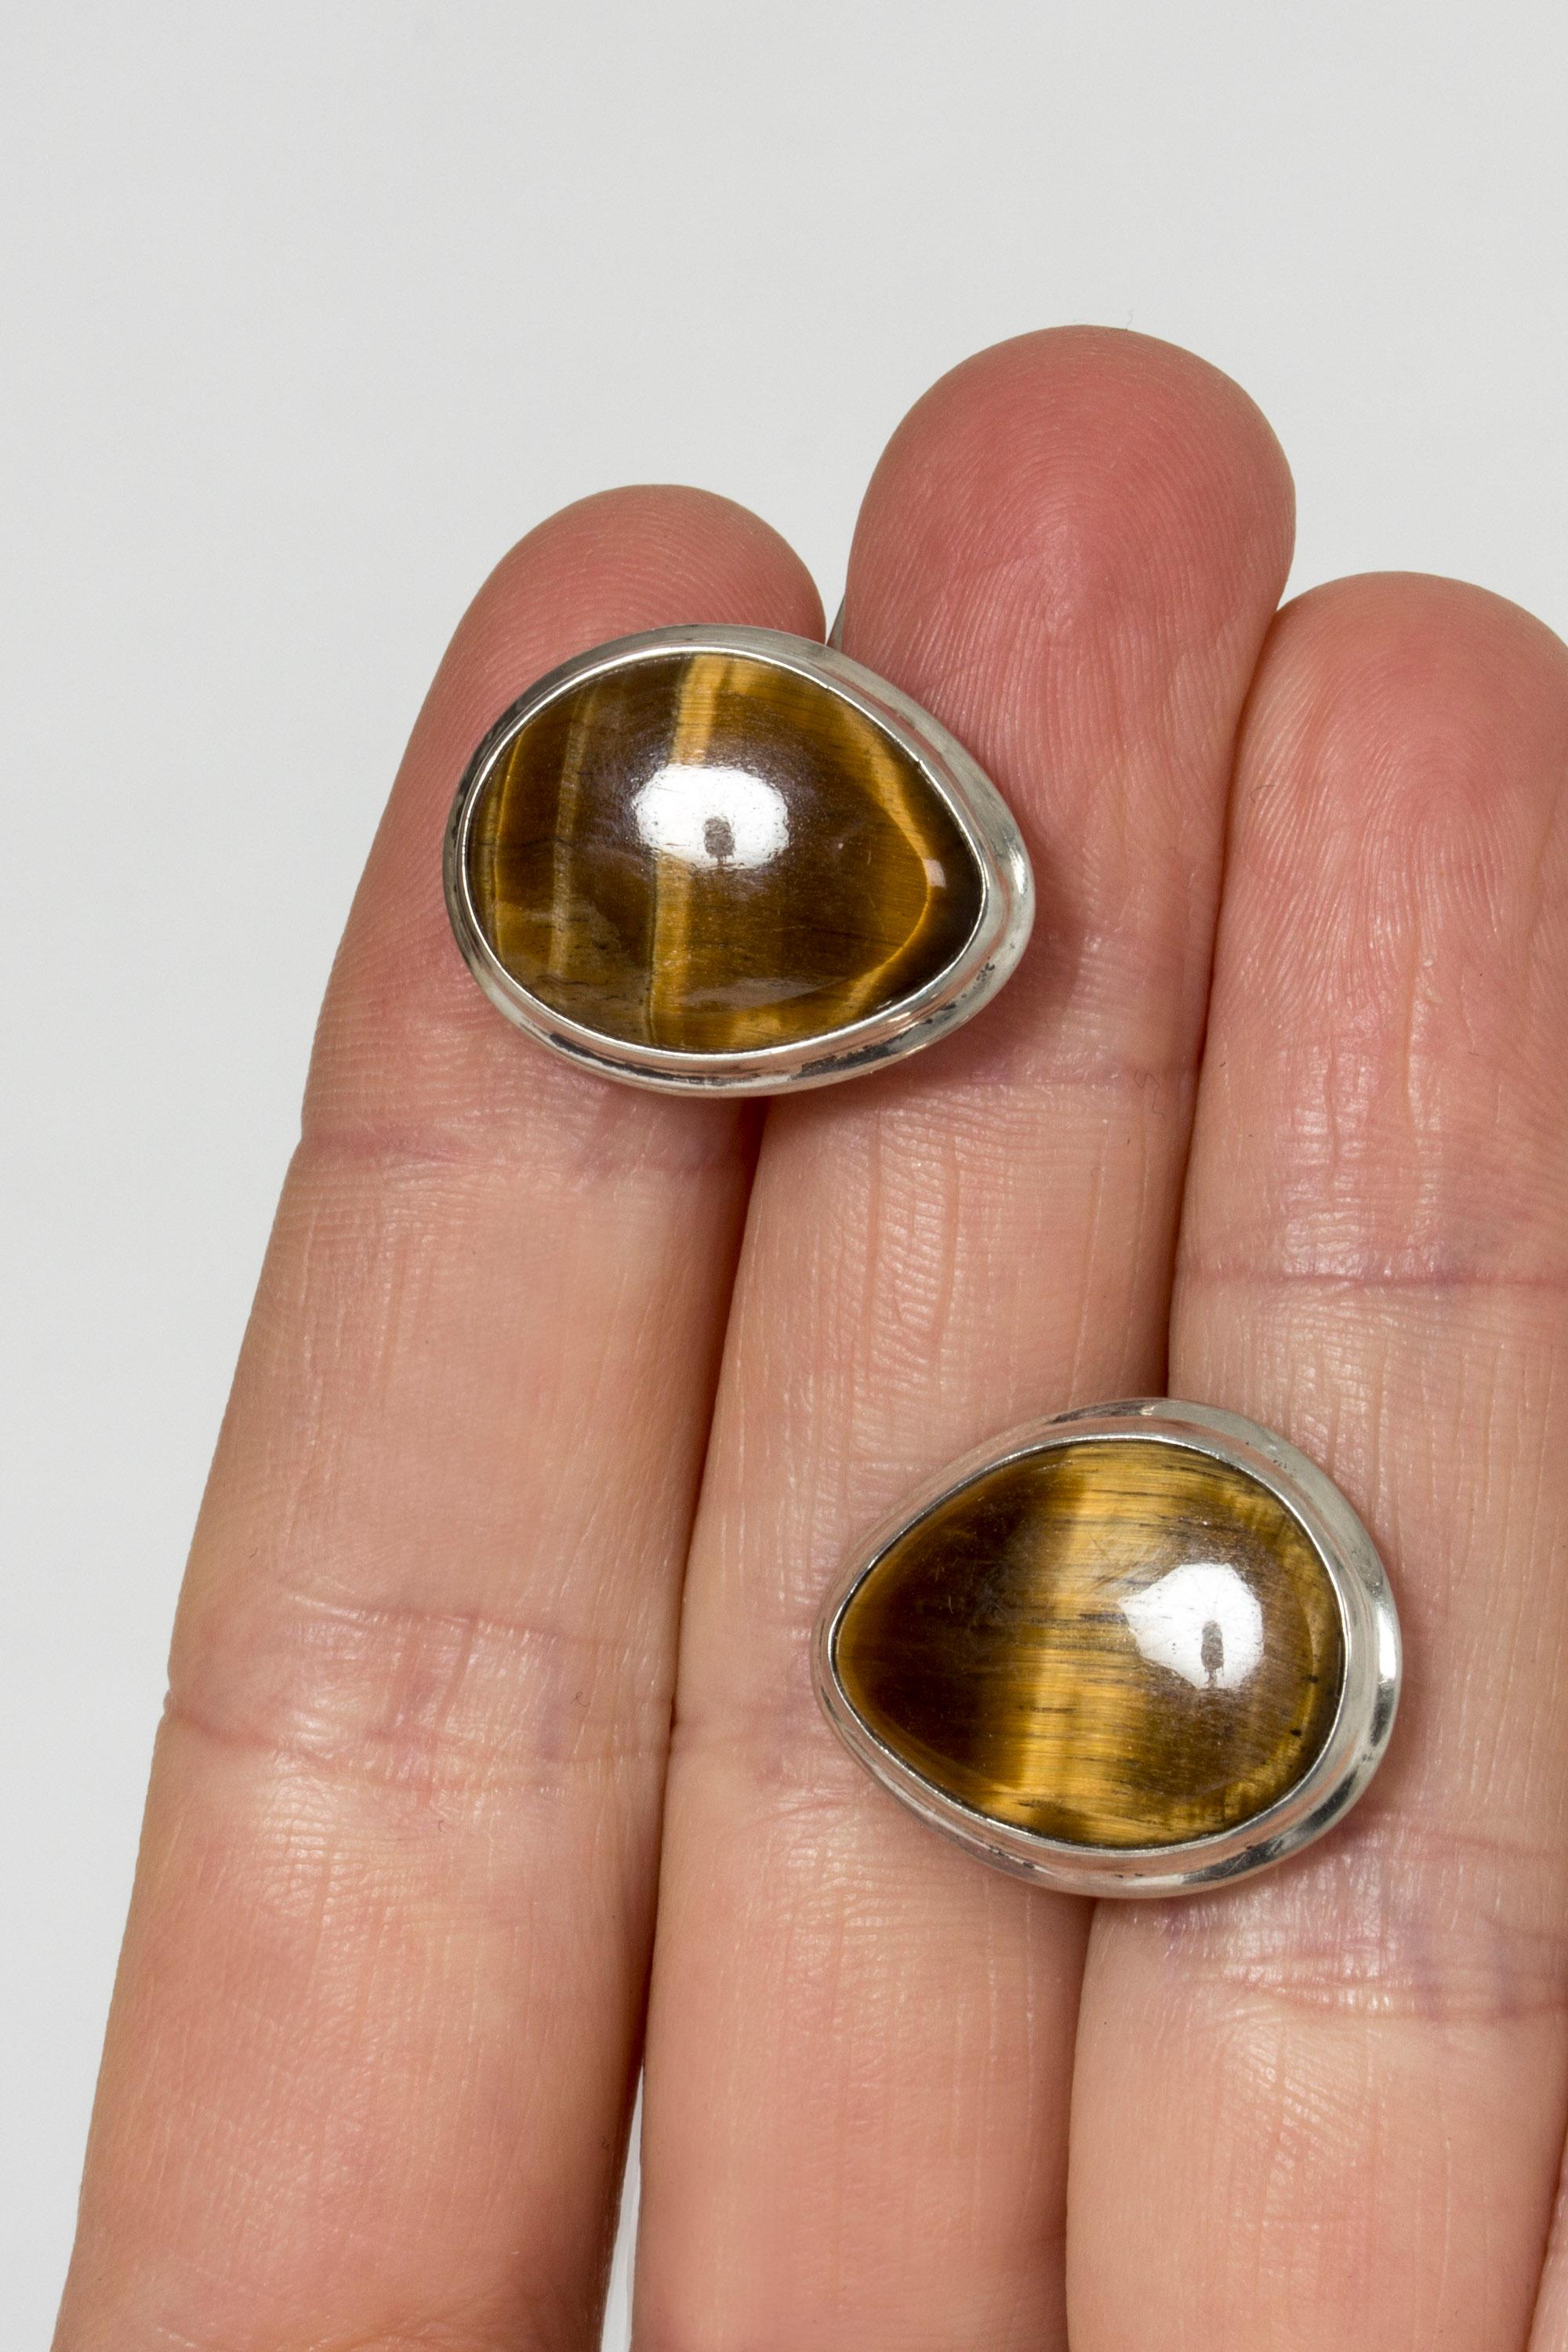 Pair of midcentury silver cufflinks set with drop-shaped tigereye stones. Nice size and lovely sheen.